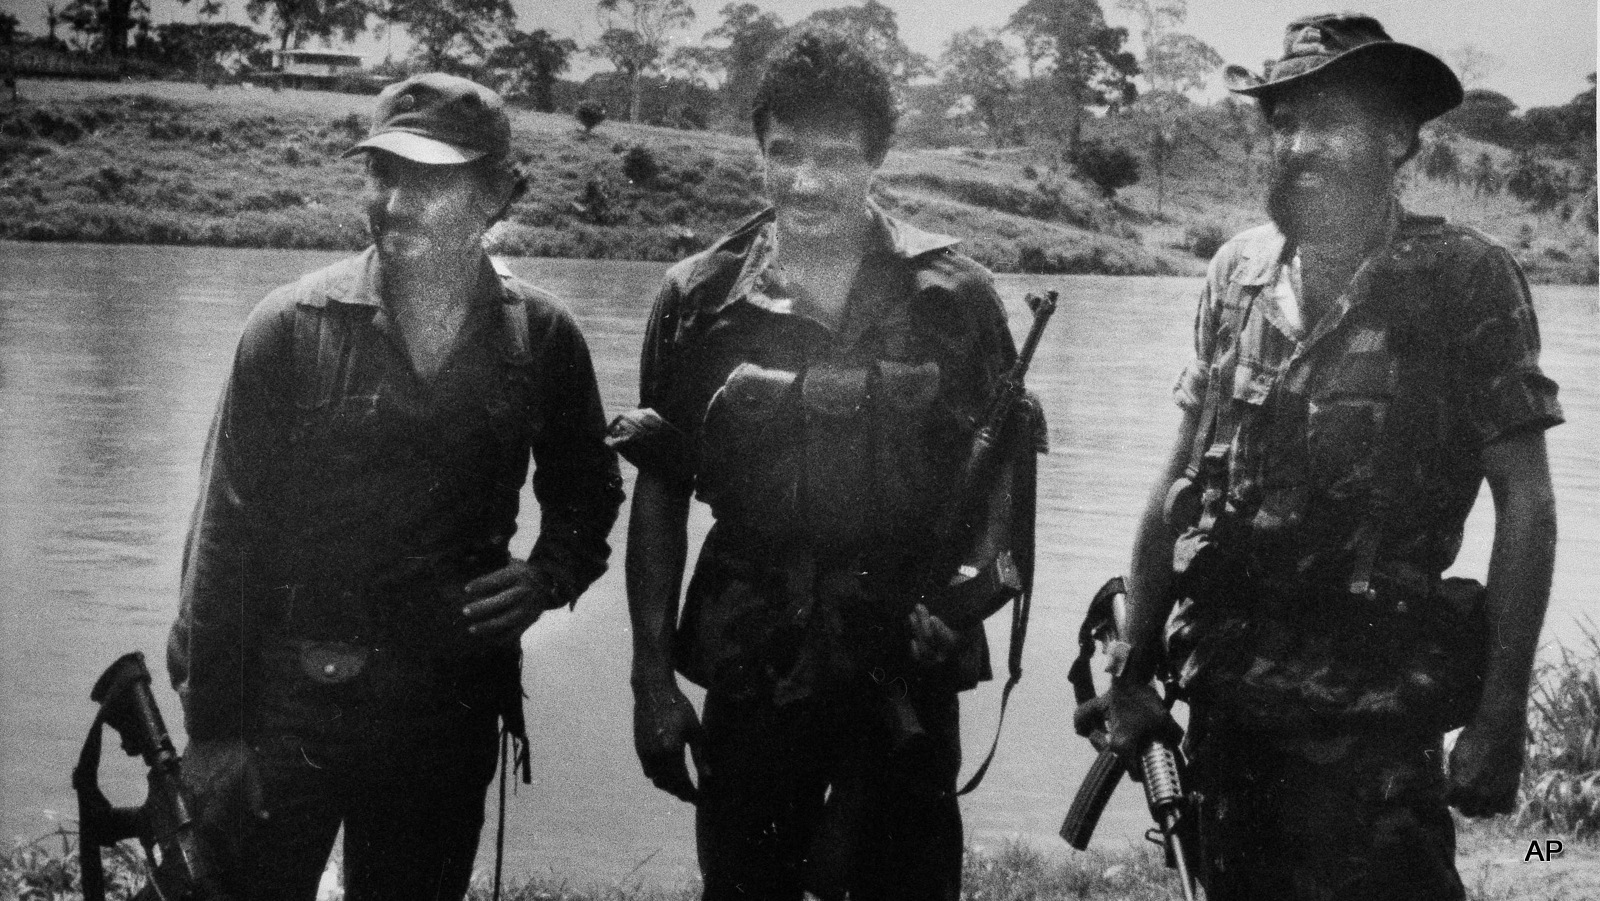 U.S. backed Nicaraguan rebel leader stands with guerrilla fighters with  in their camp in southern Nicaragua, 1983.  The rebel, trained, armed and funded by the CIA, formerd to overthrow the Nicaraguan Sandinista government. 